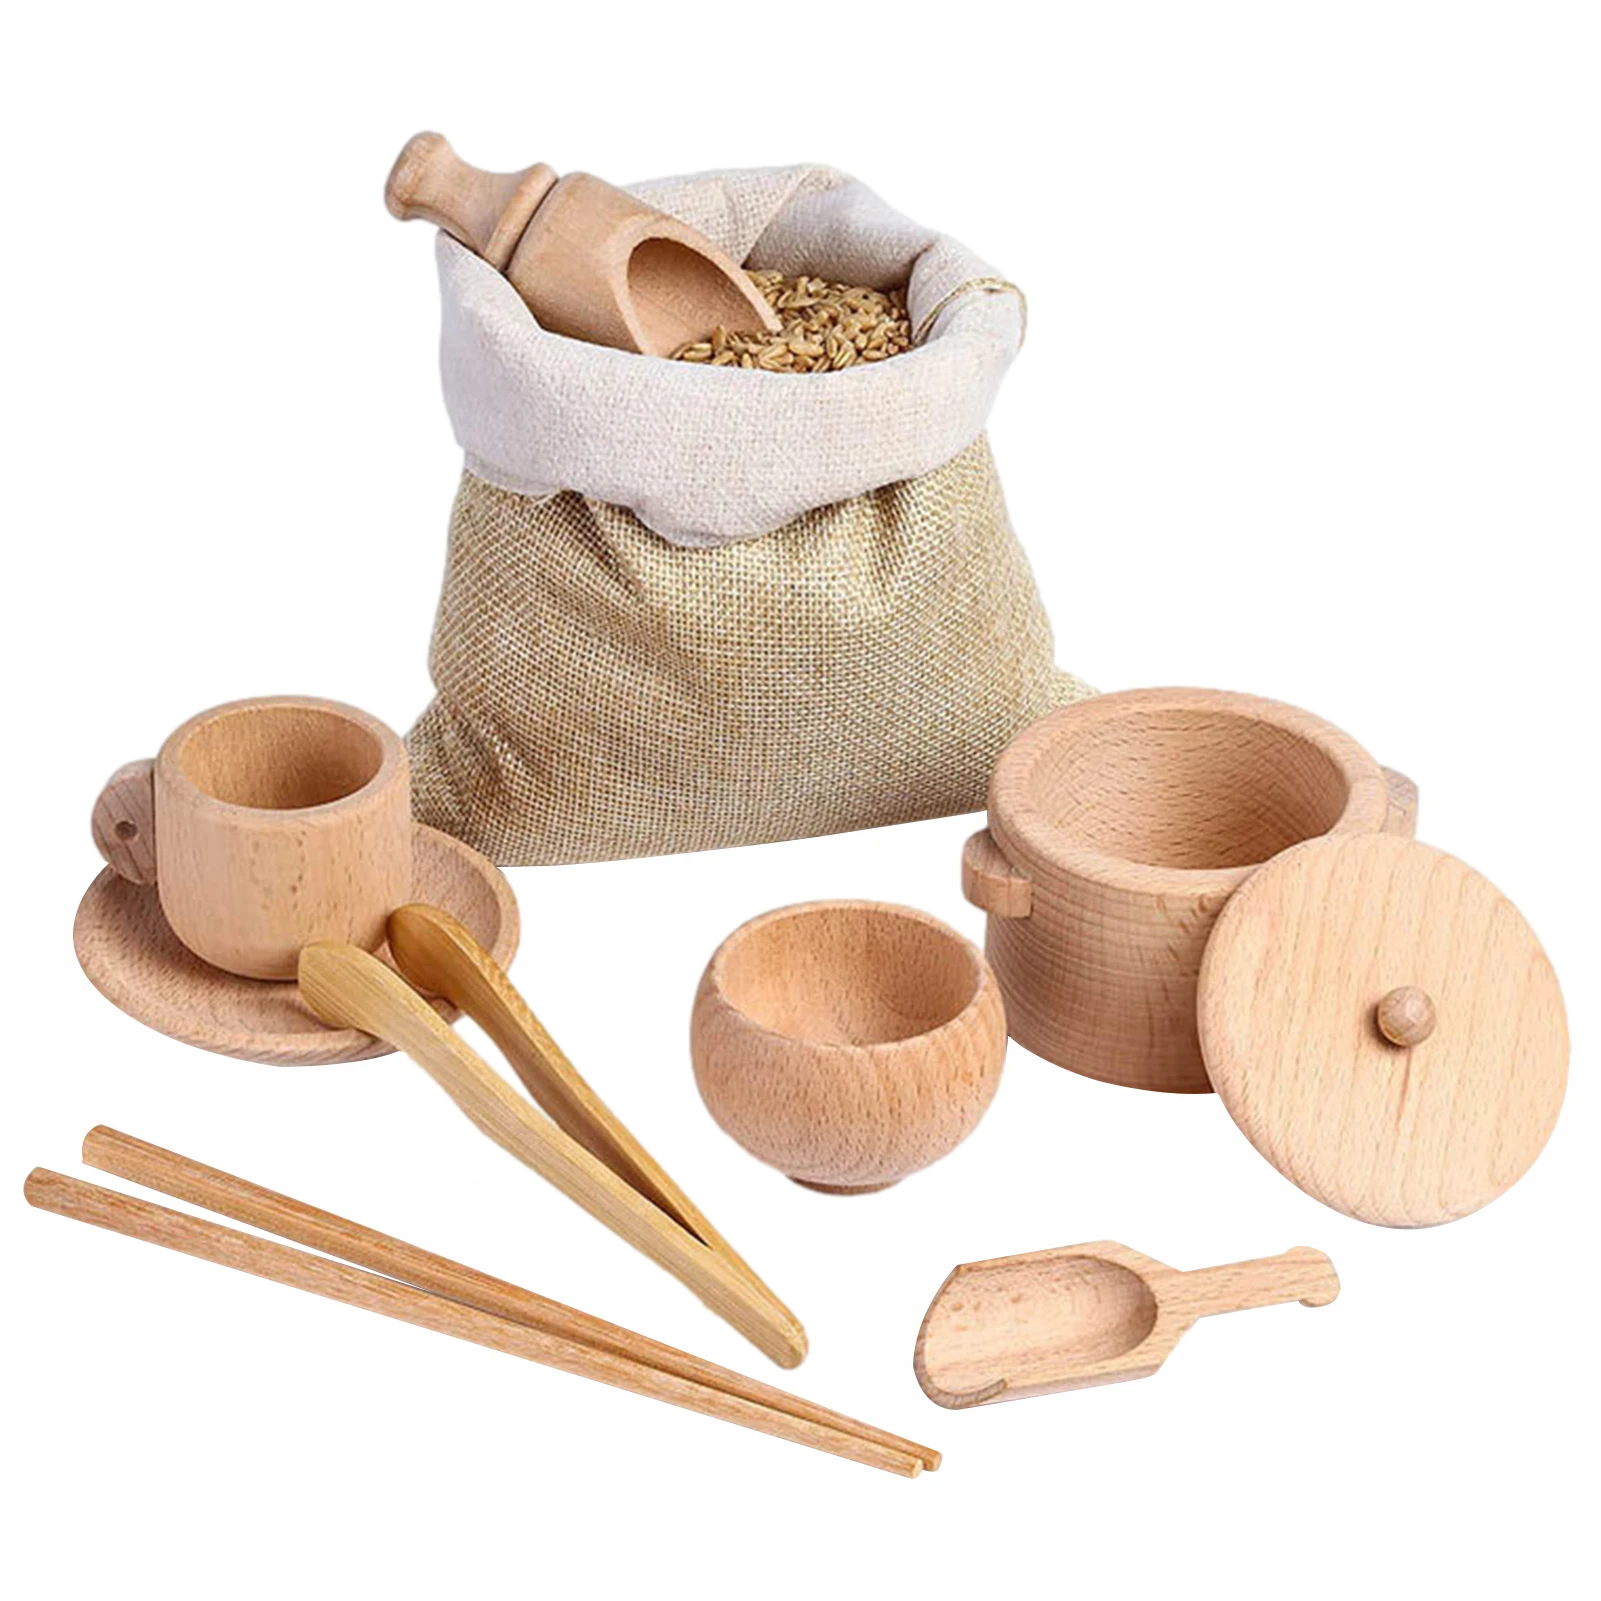 Wooden Sensory Bin Tools 8 PCS Fine Motor Learning Pretend Play For Kids Sensory Tools For Toddlers And Preschool Children